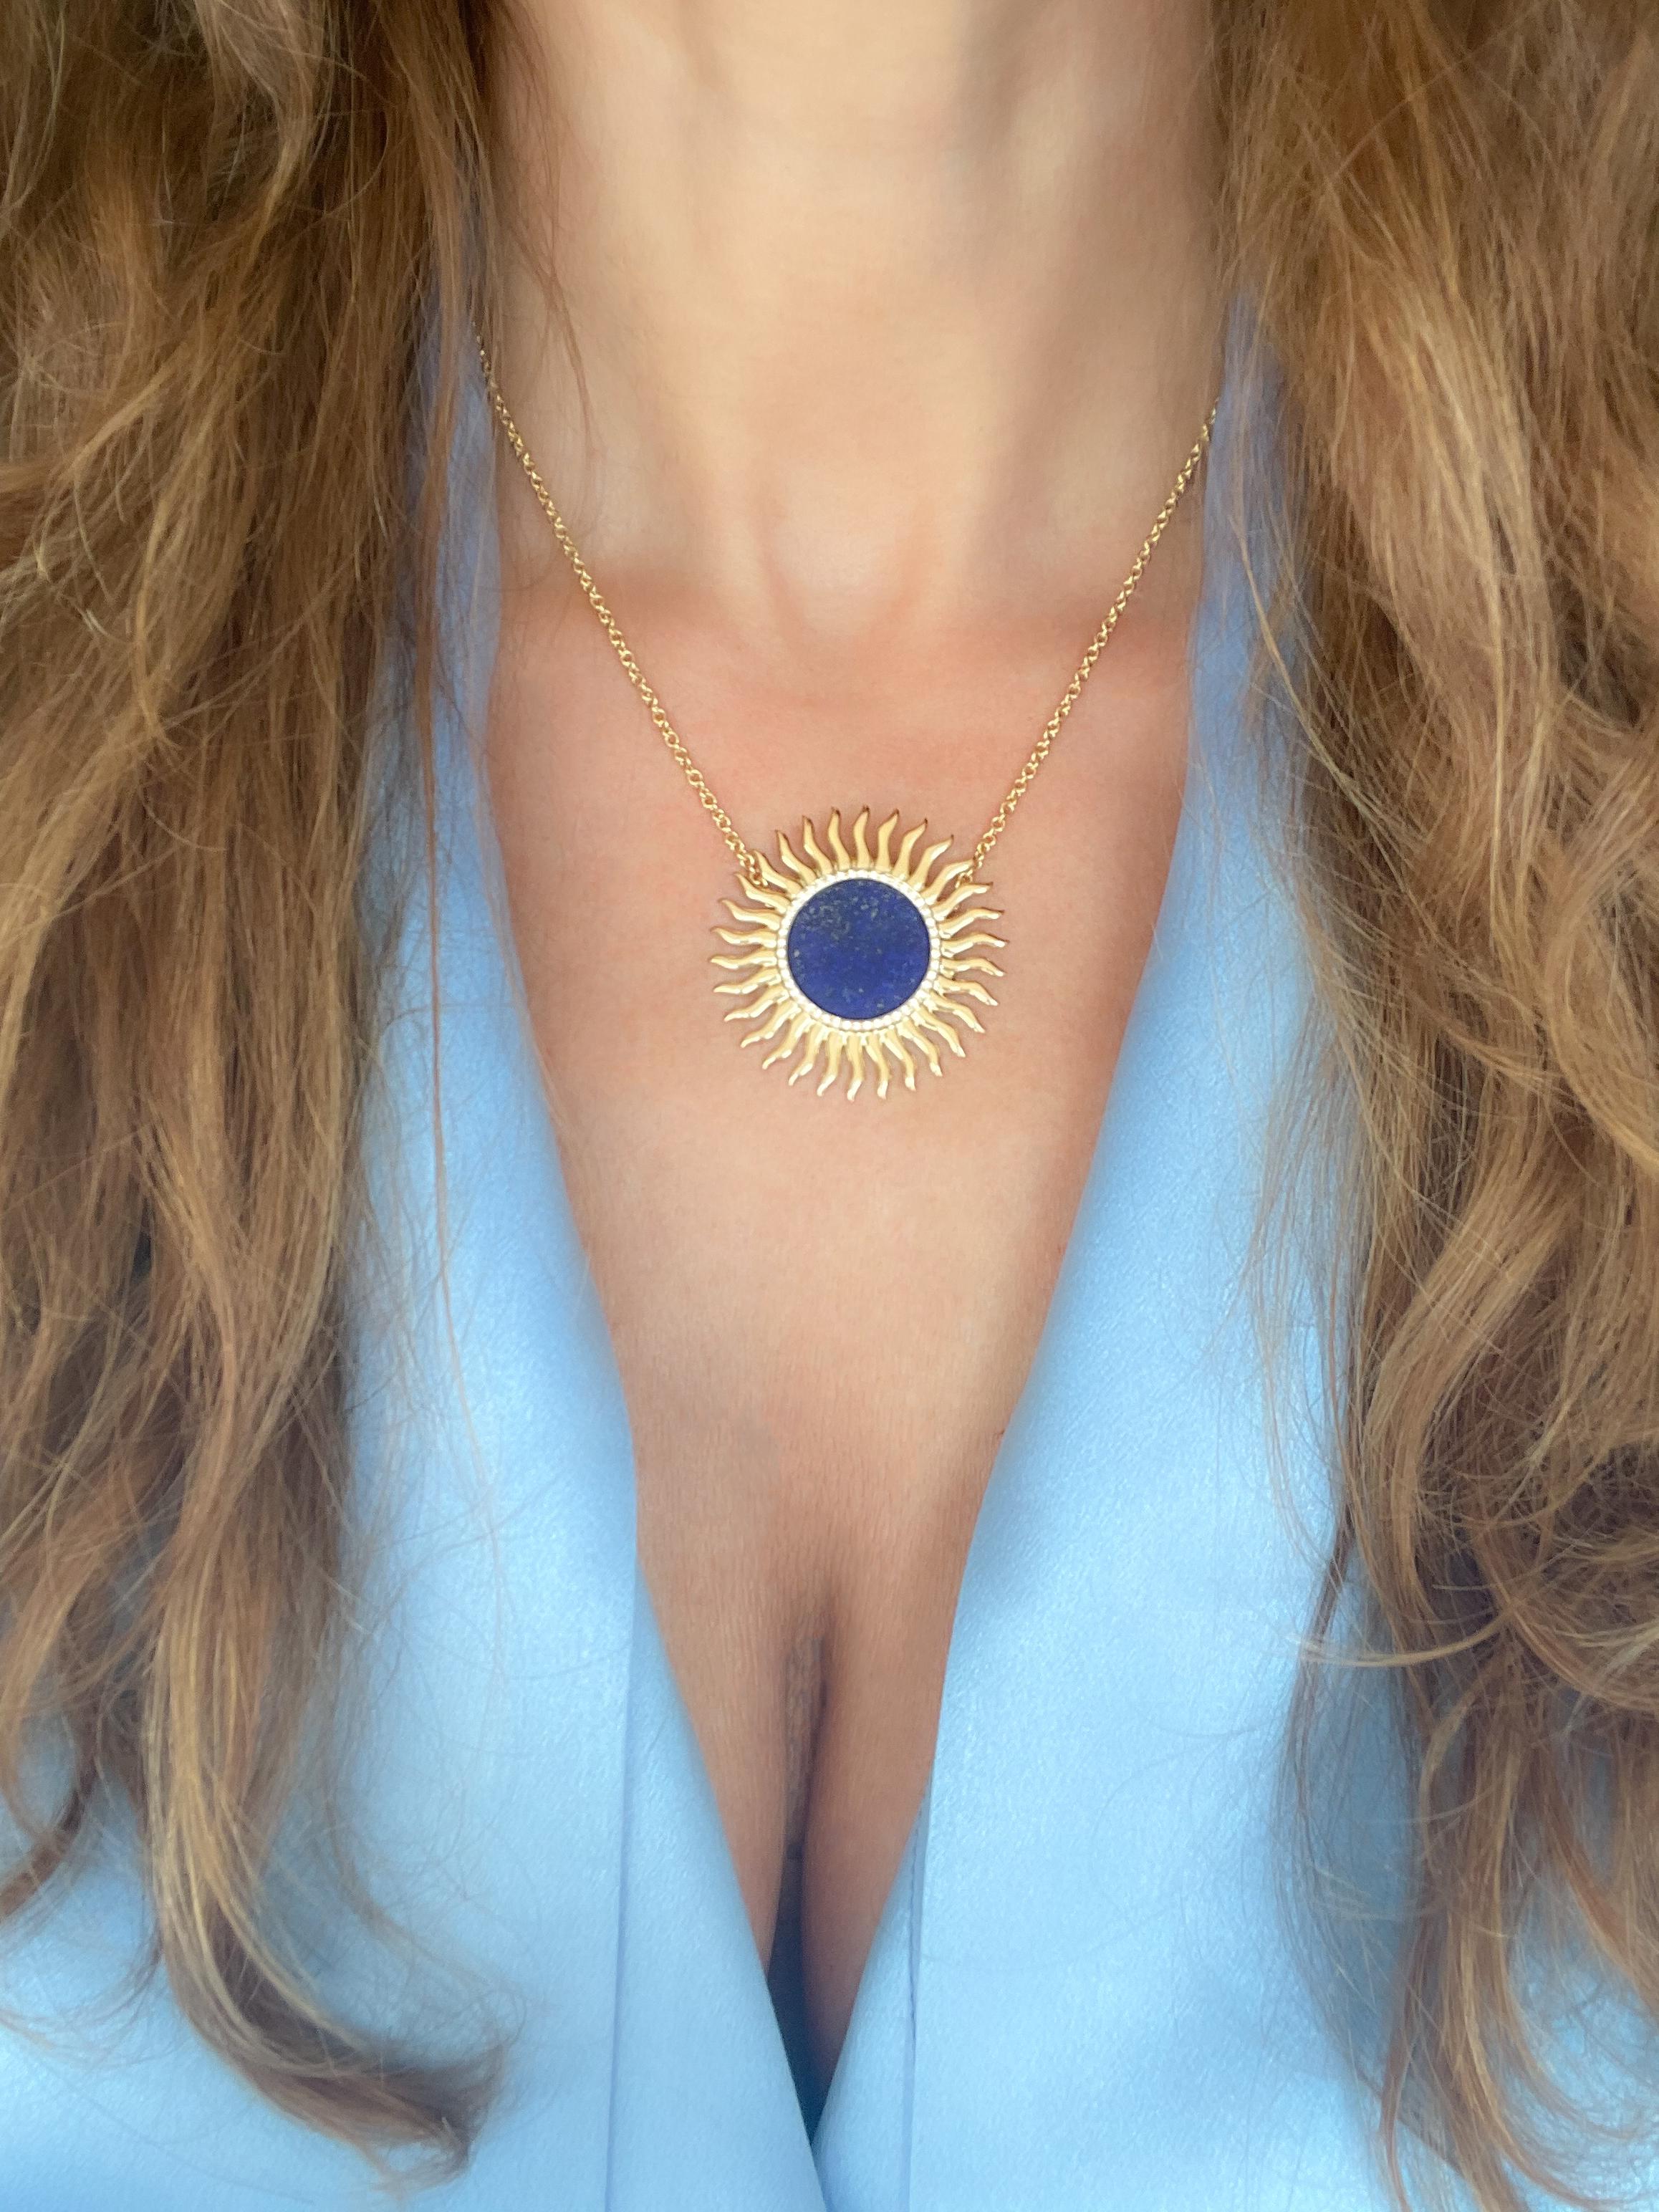 The solar-shaped pendant is crafted in 18k yellow gold and paired with lapis lazuli edged by 45 round brillant cut white diamonds for 0.18 ct. The solar gold ornament measures ≈ 1 1/2